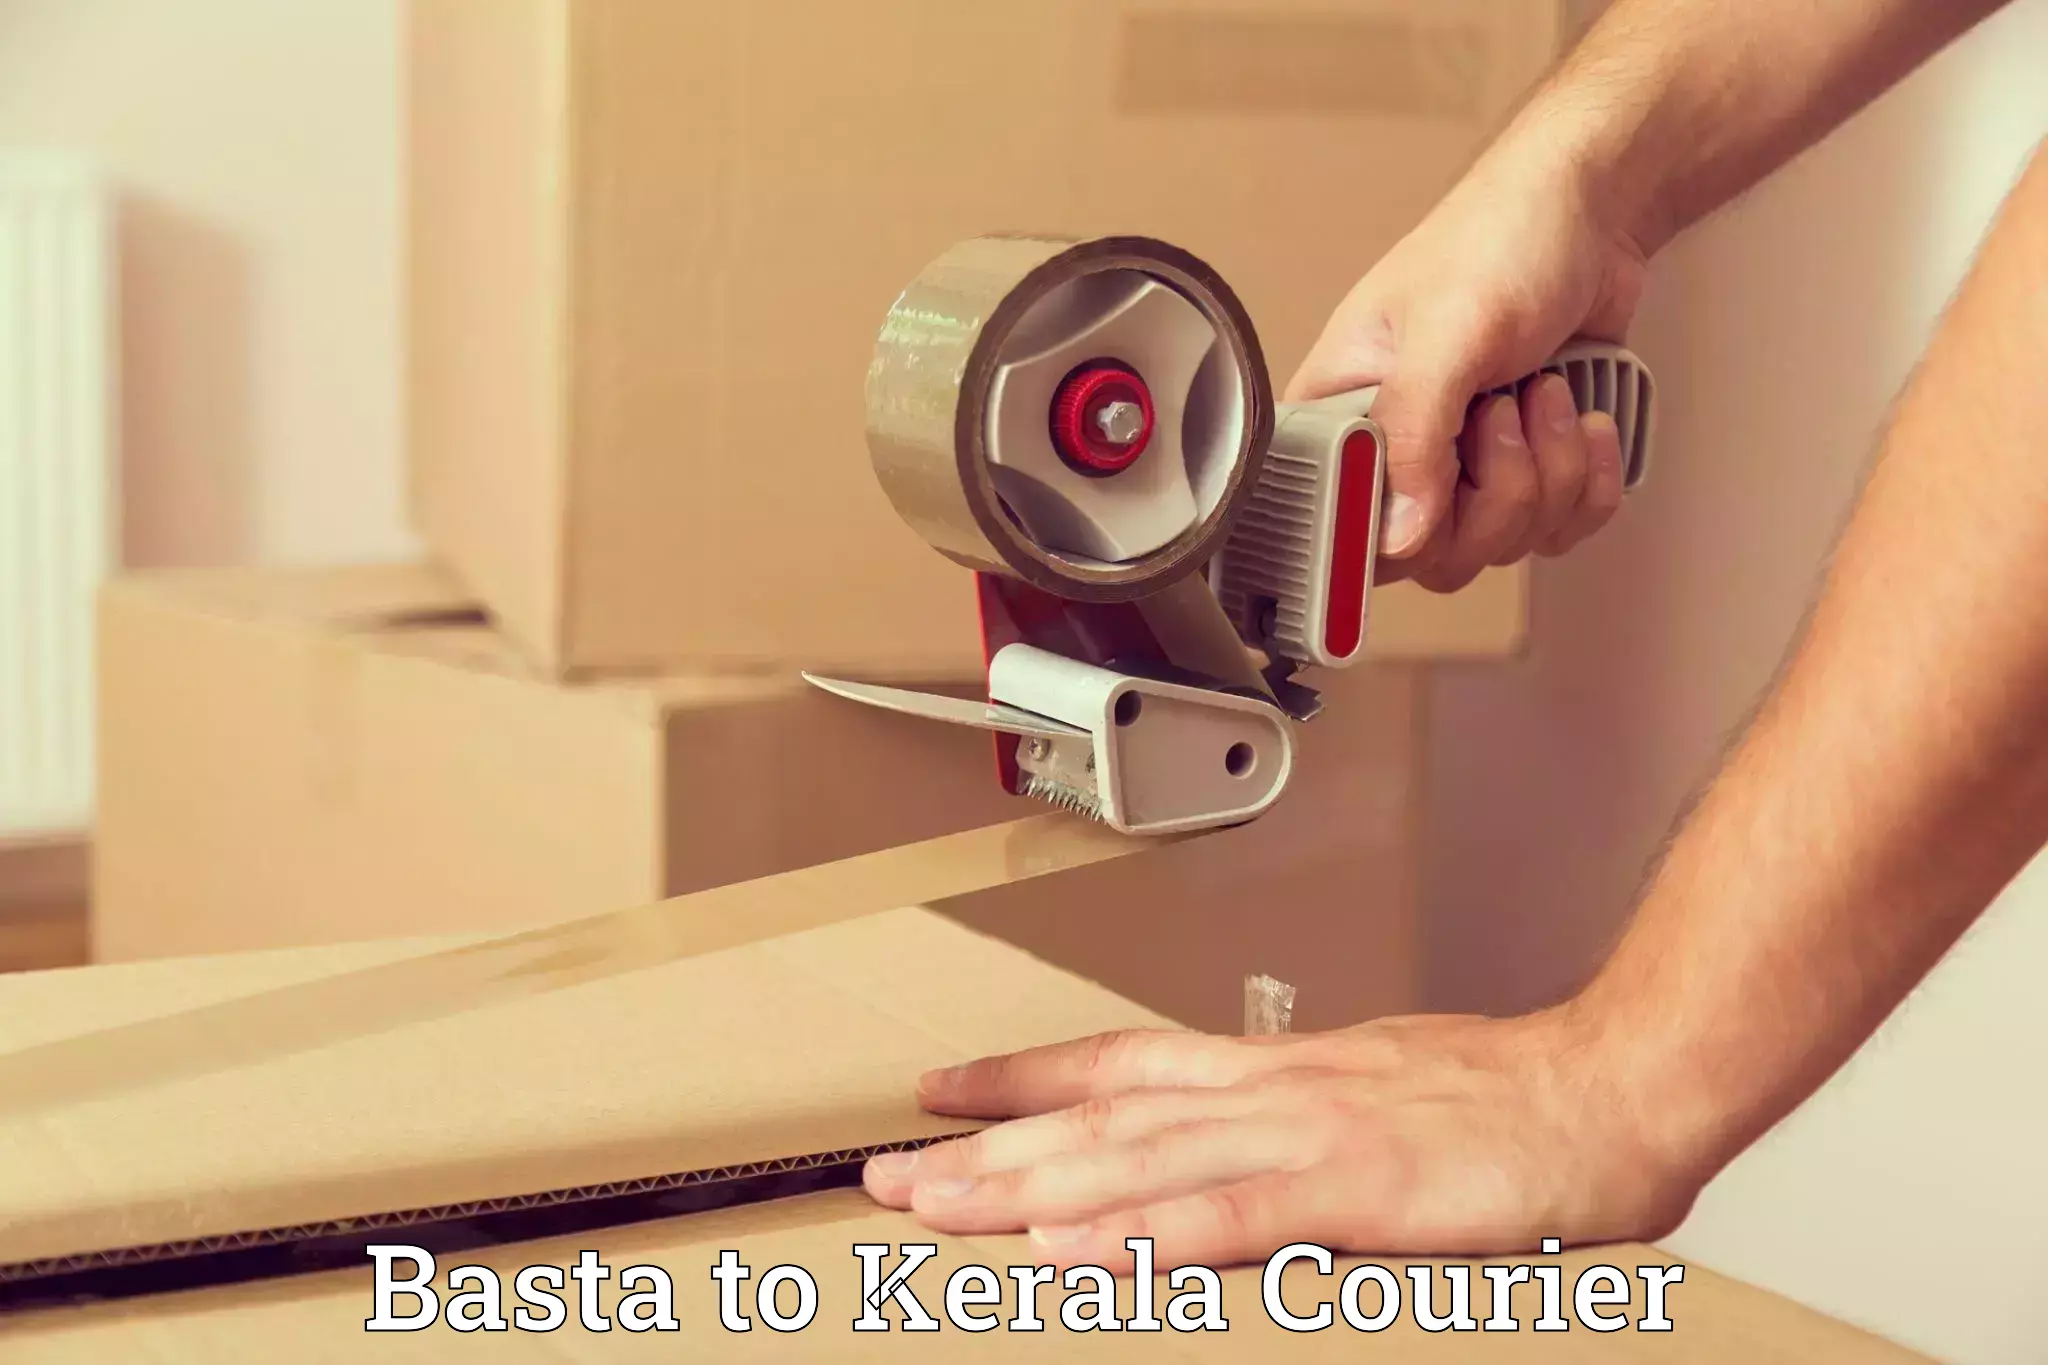 Quality relocation services Basta to Kerala